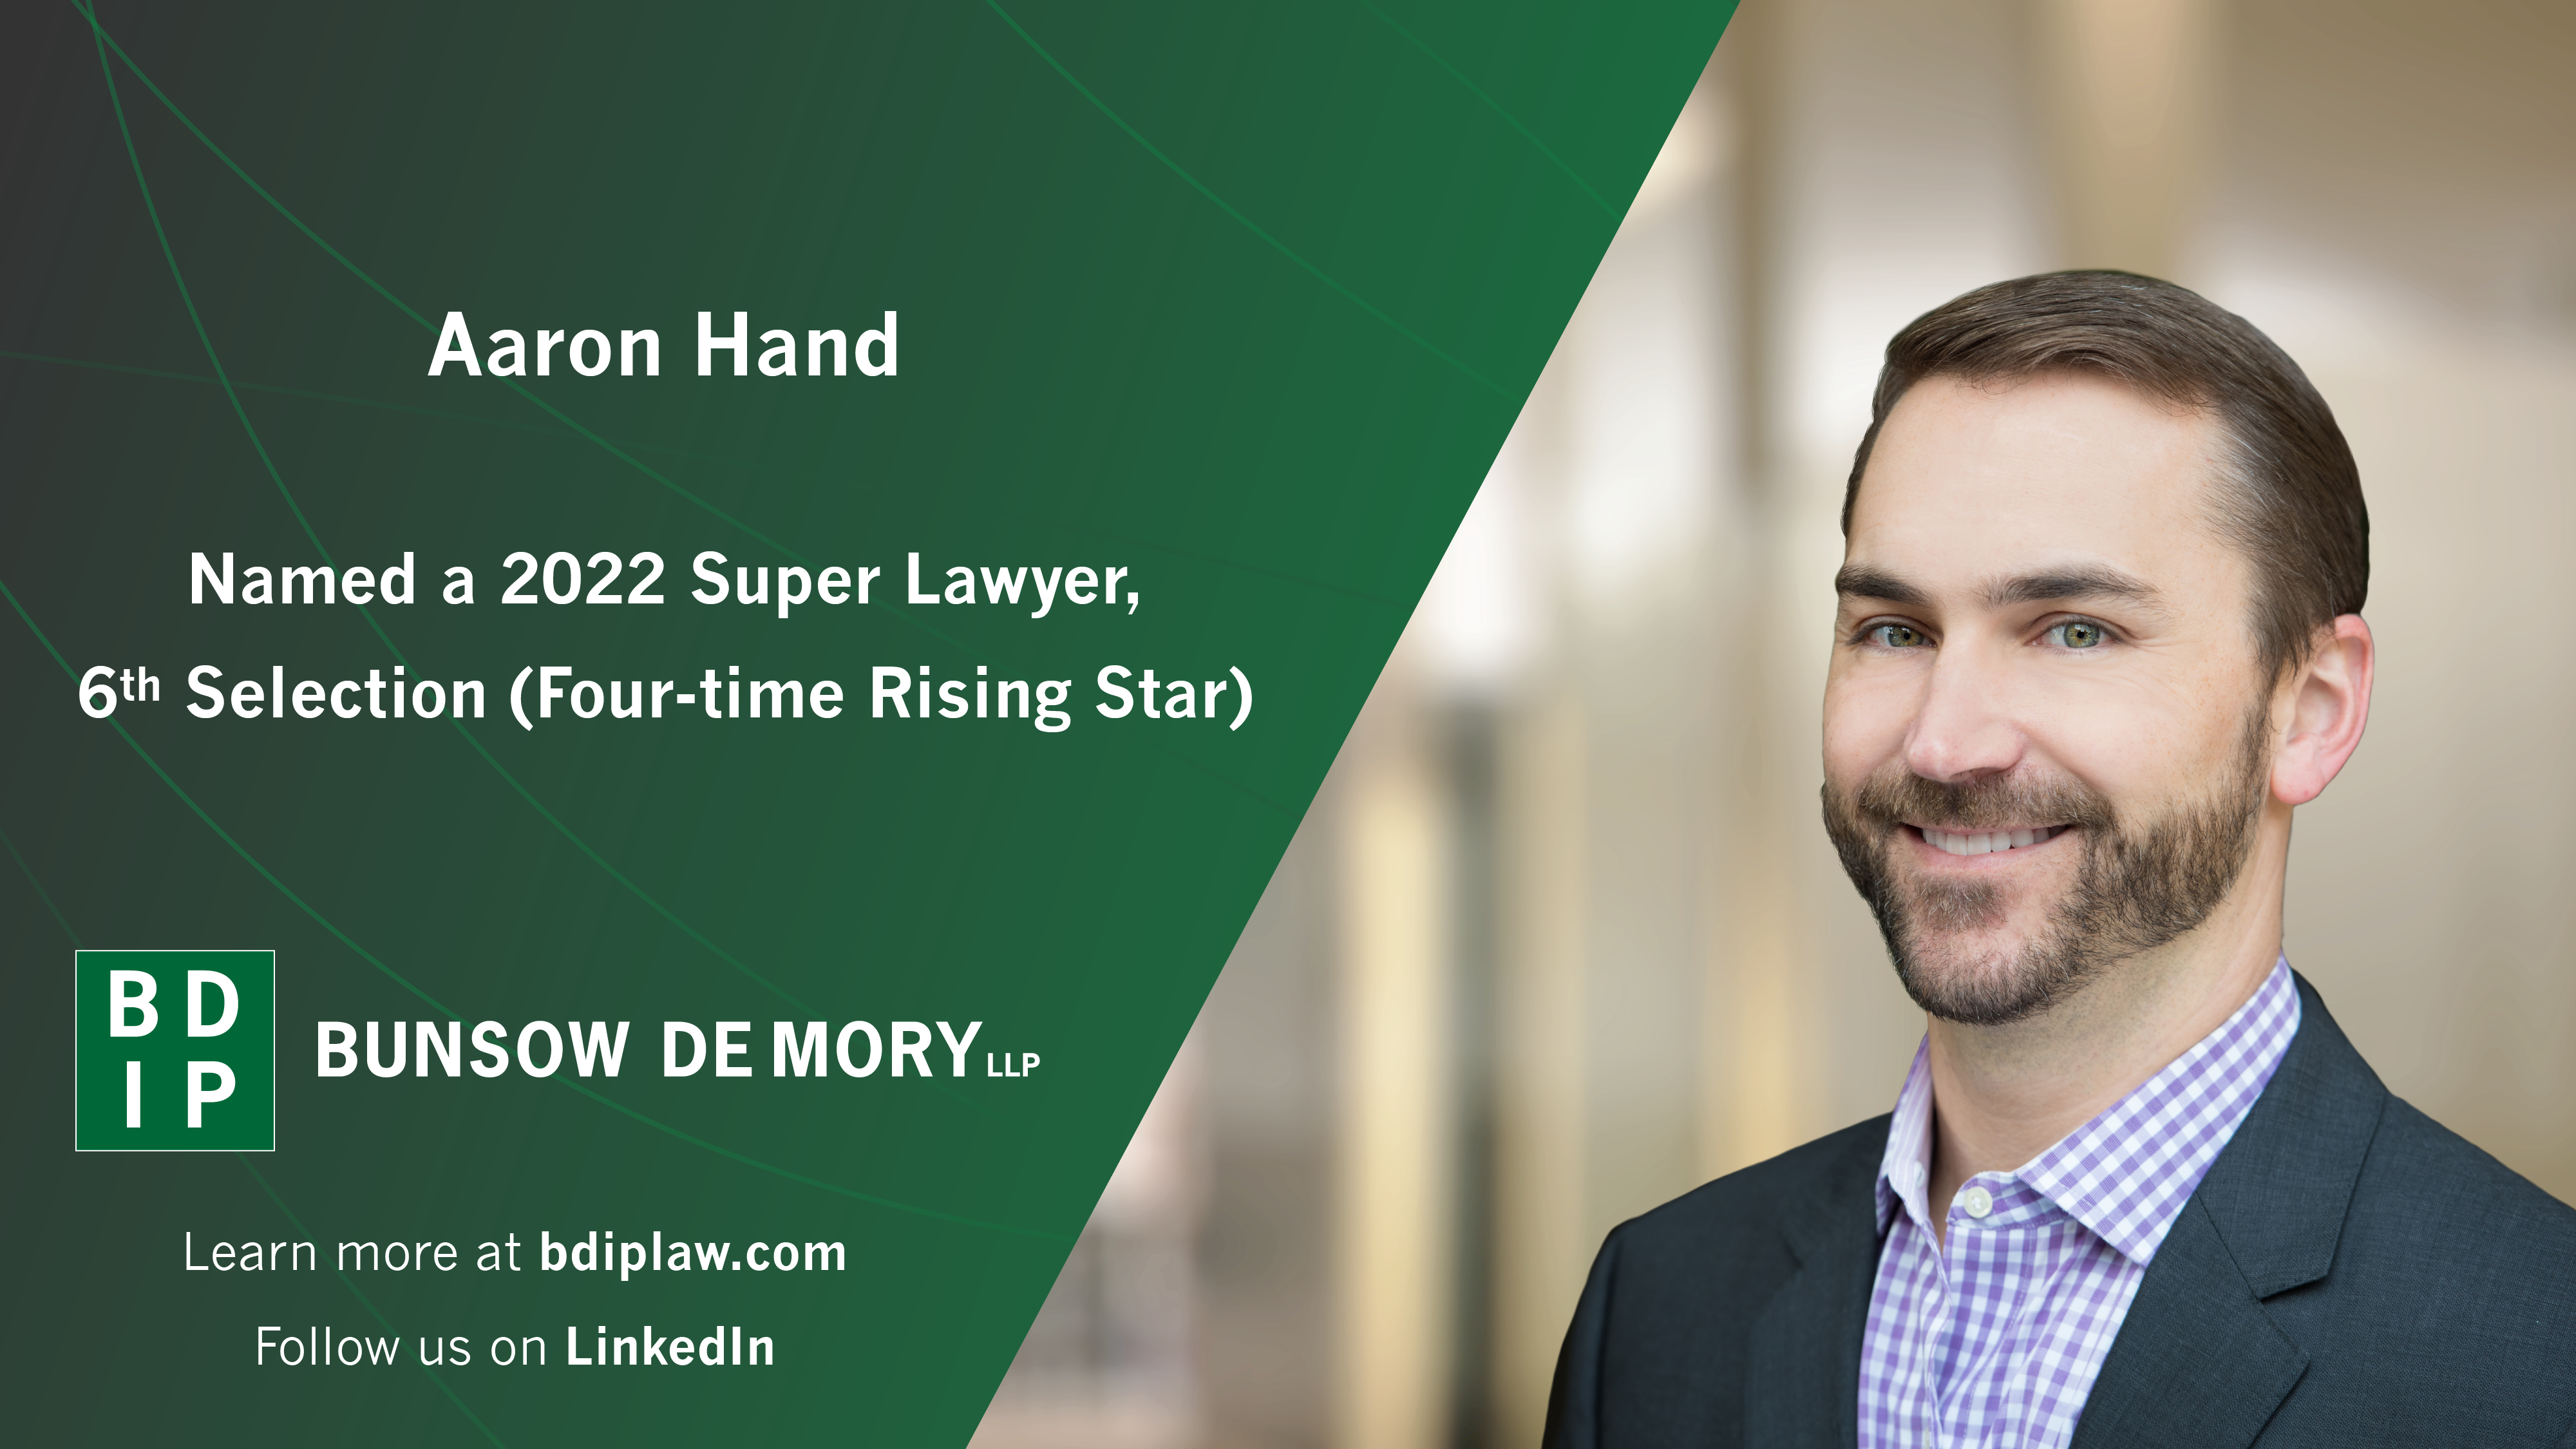 Aaron Hand Named a 2022 Northern California Super Lawyer